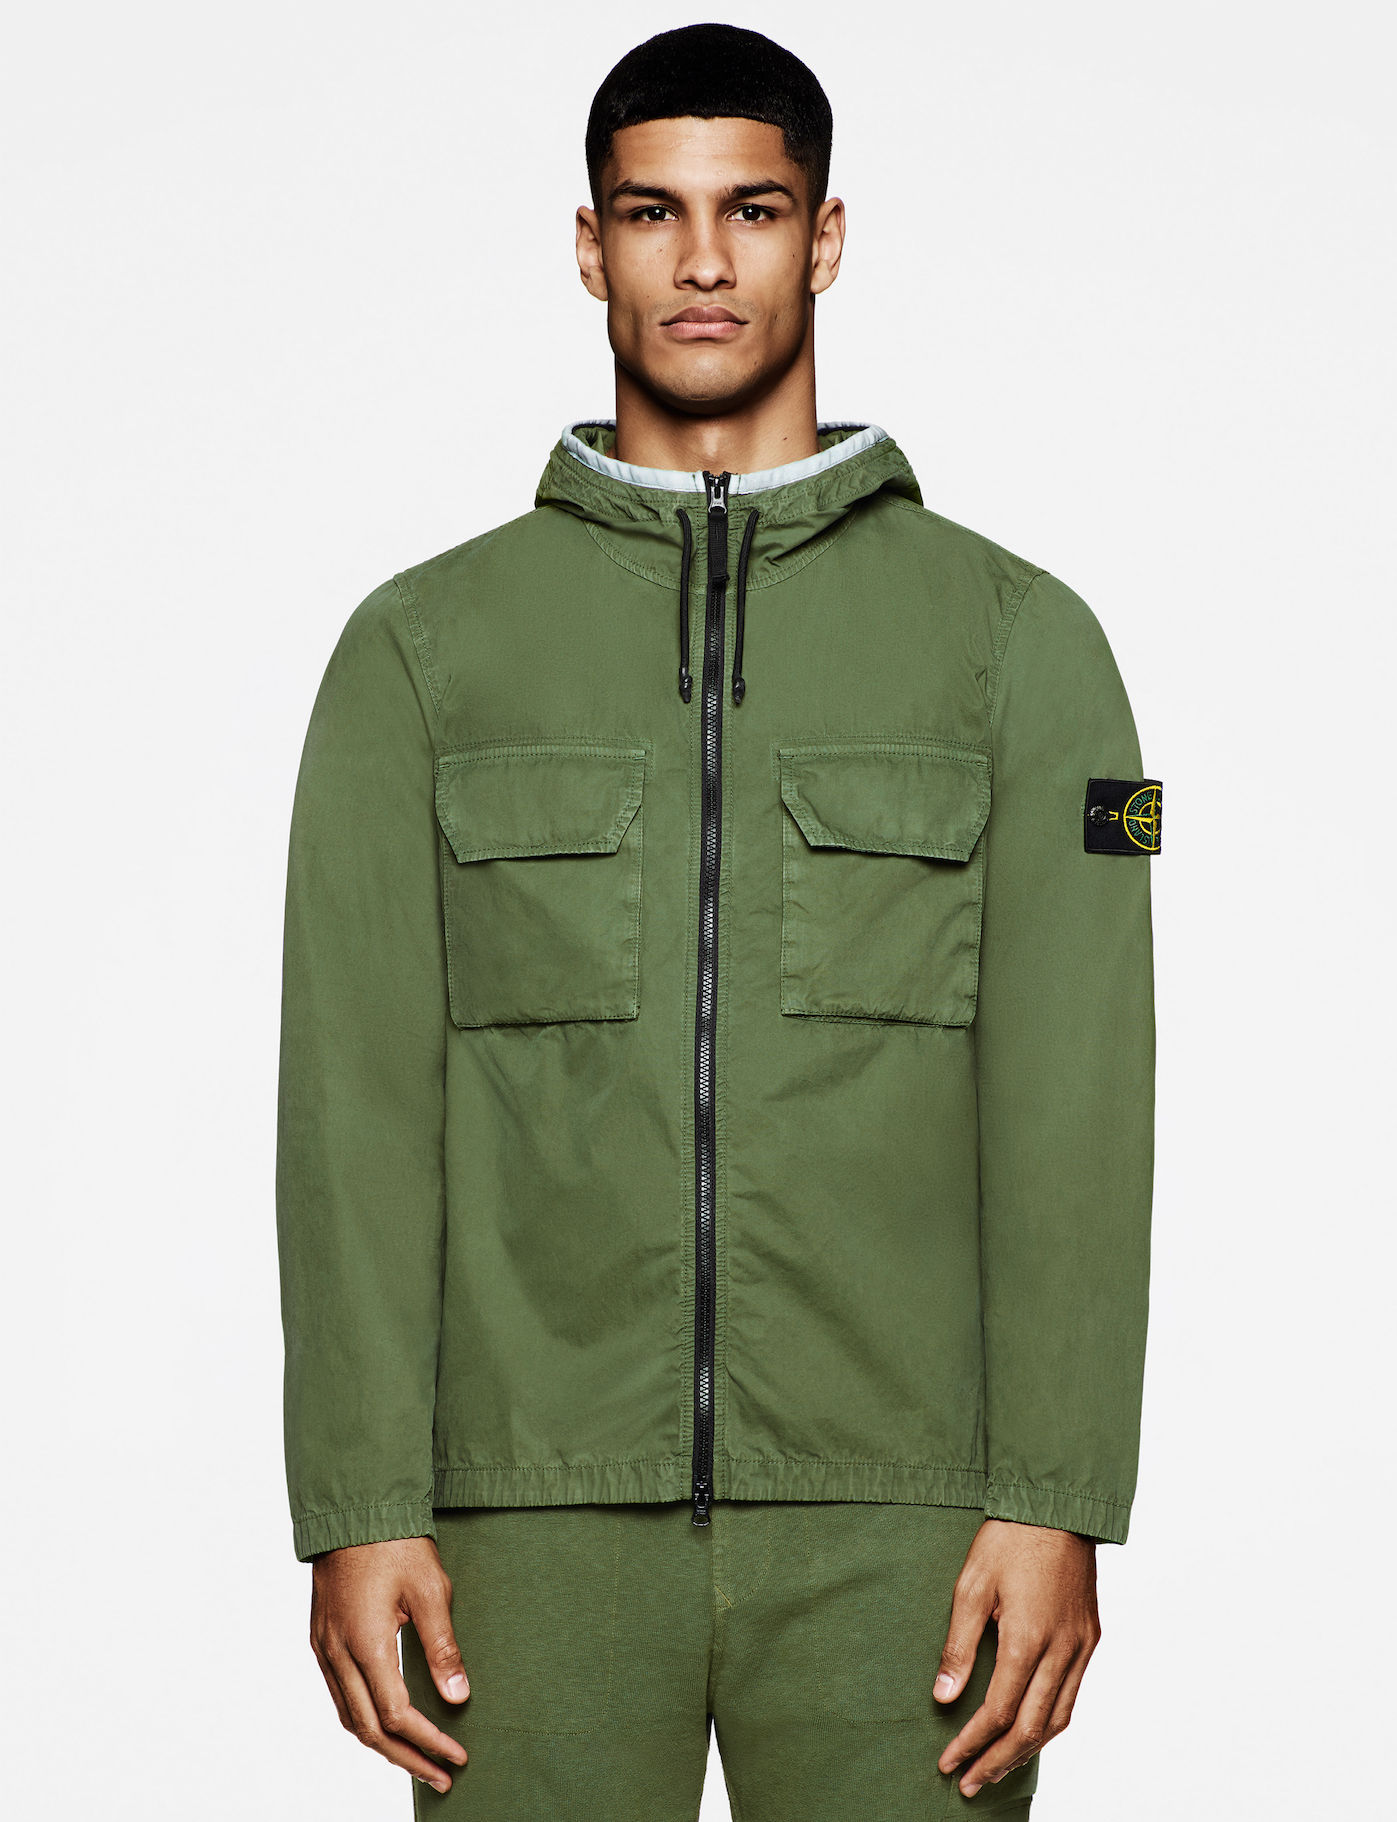 Stone Island reissues its best techwear styles for its 40th anniversary